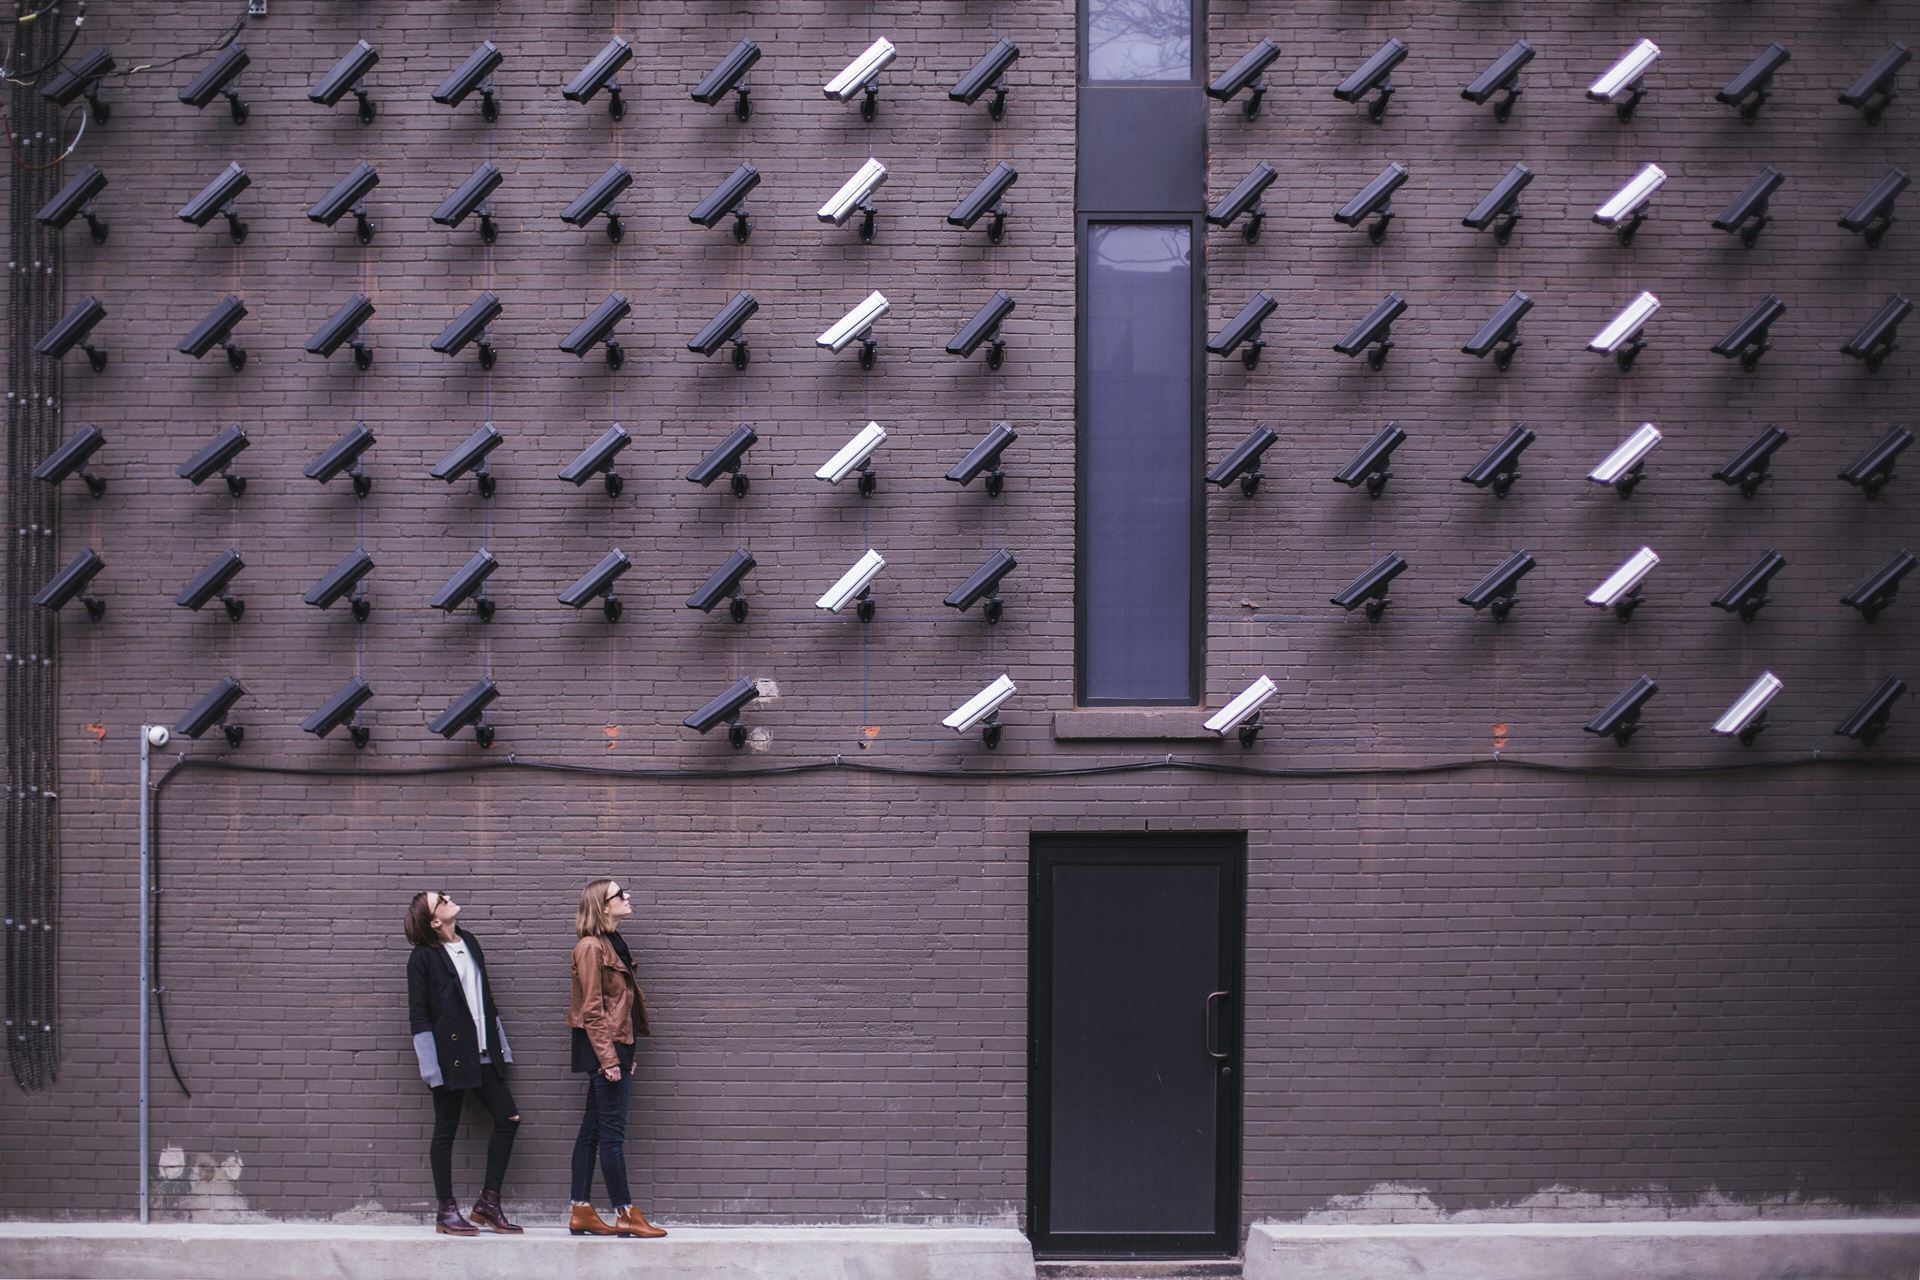 People looking up at tons of cameras on a building